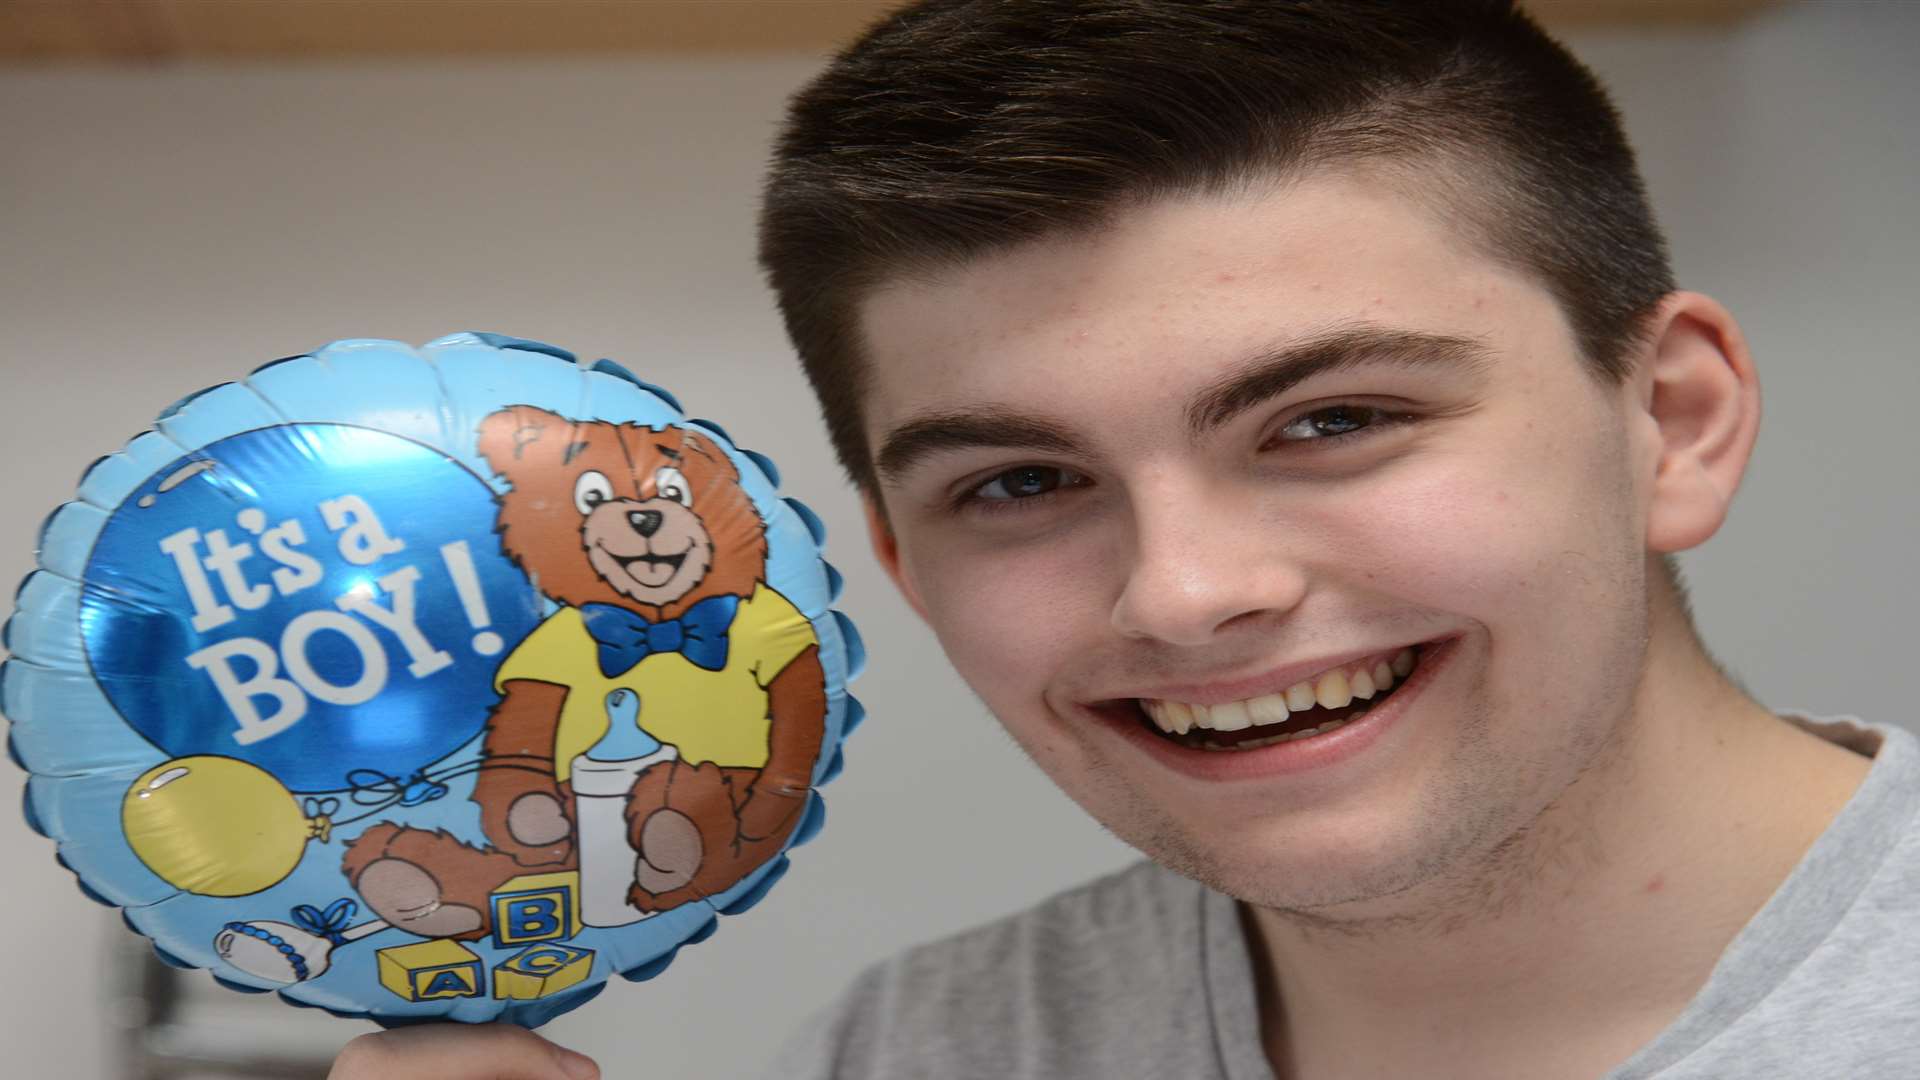 Zachary Starr, who has had the helium balloon since he was born